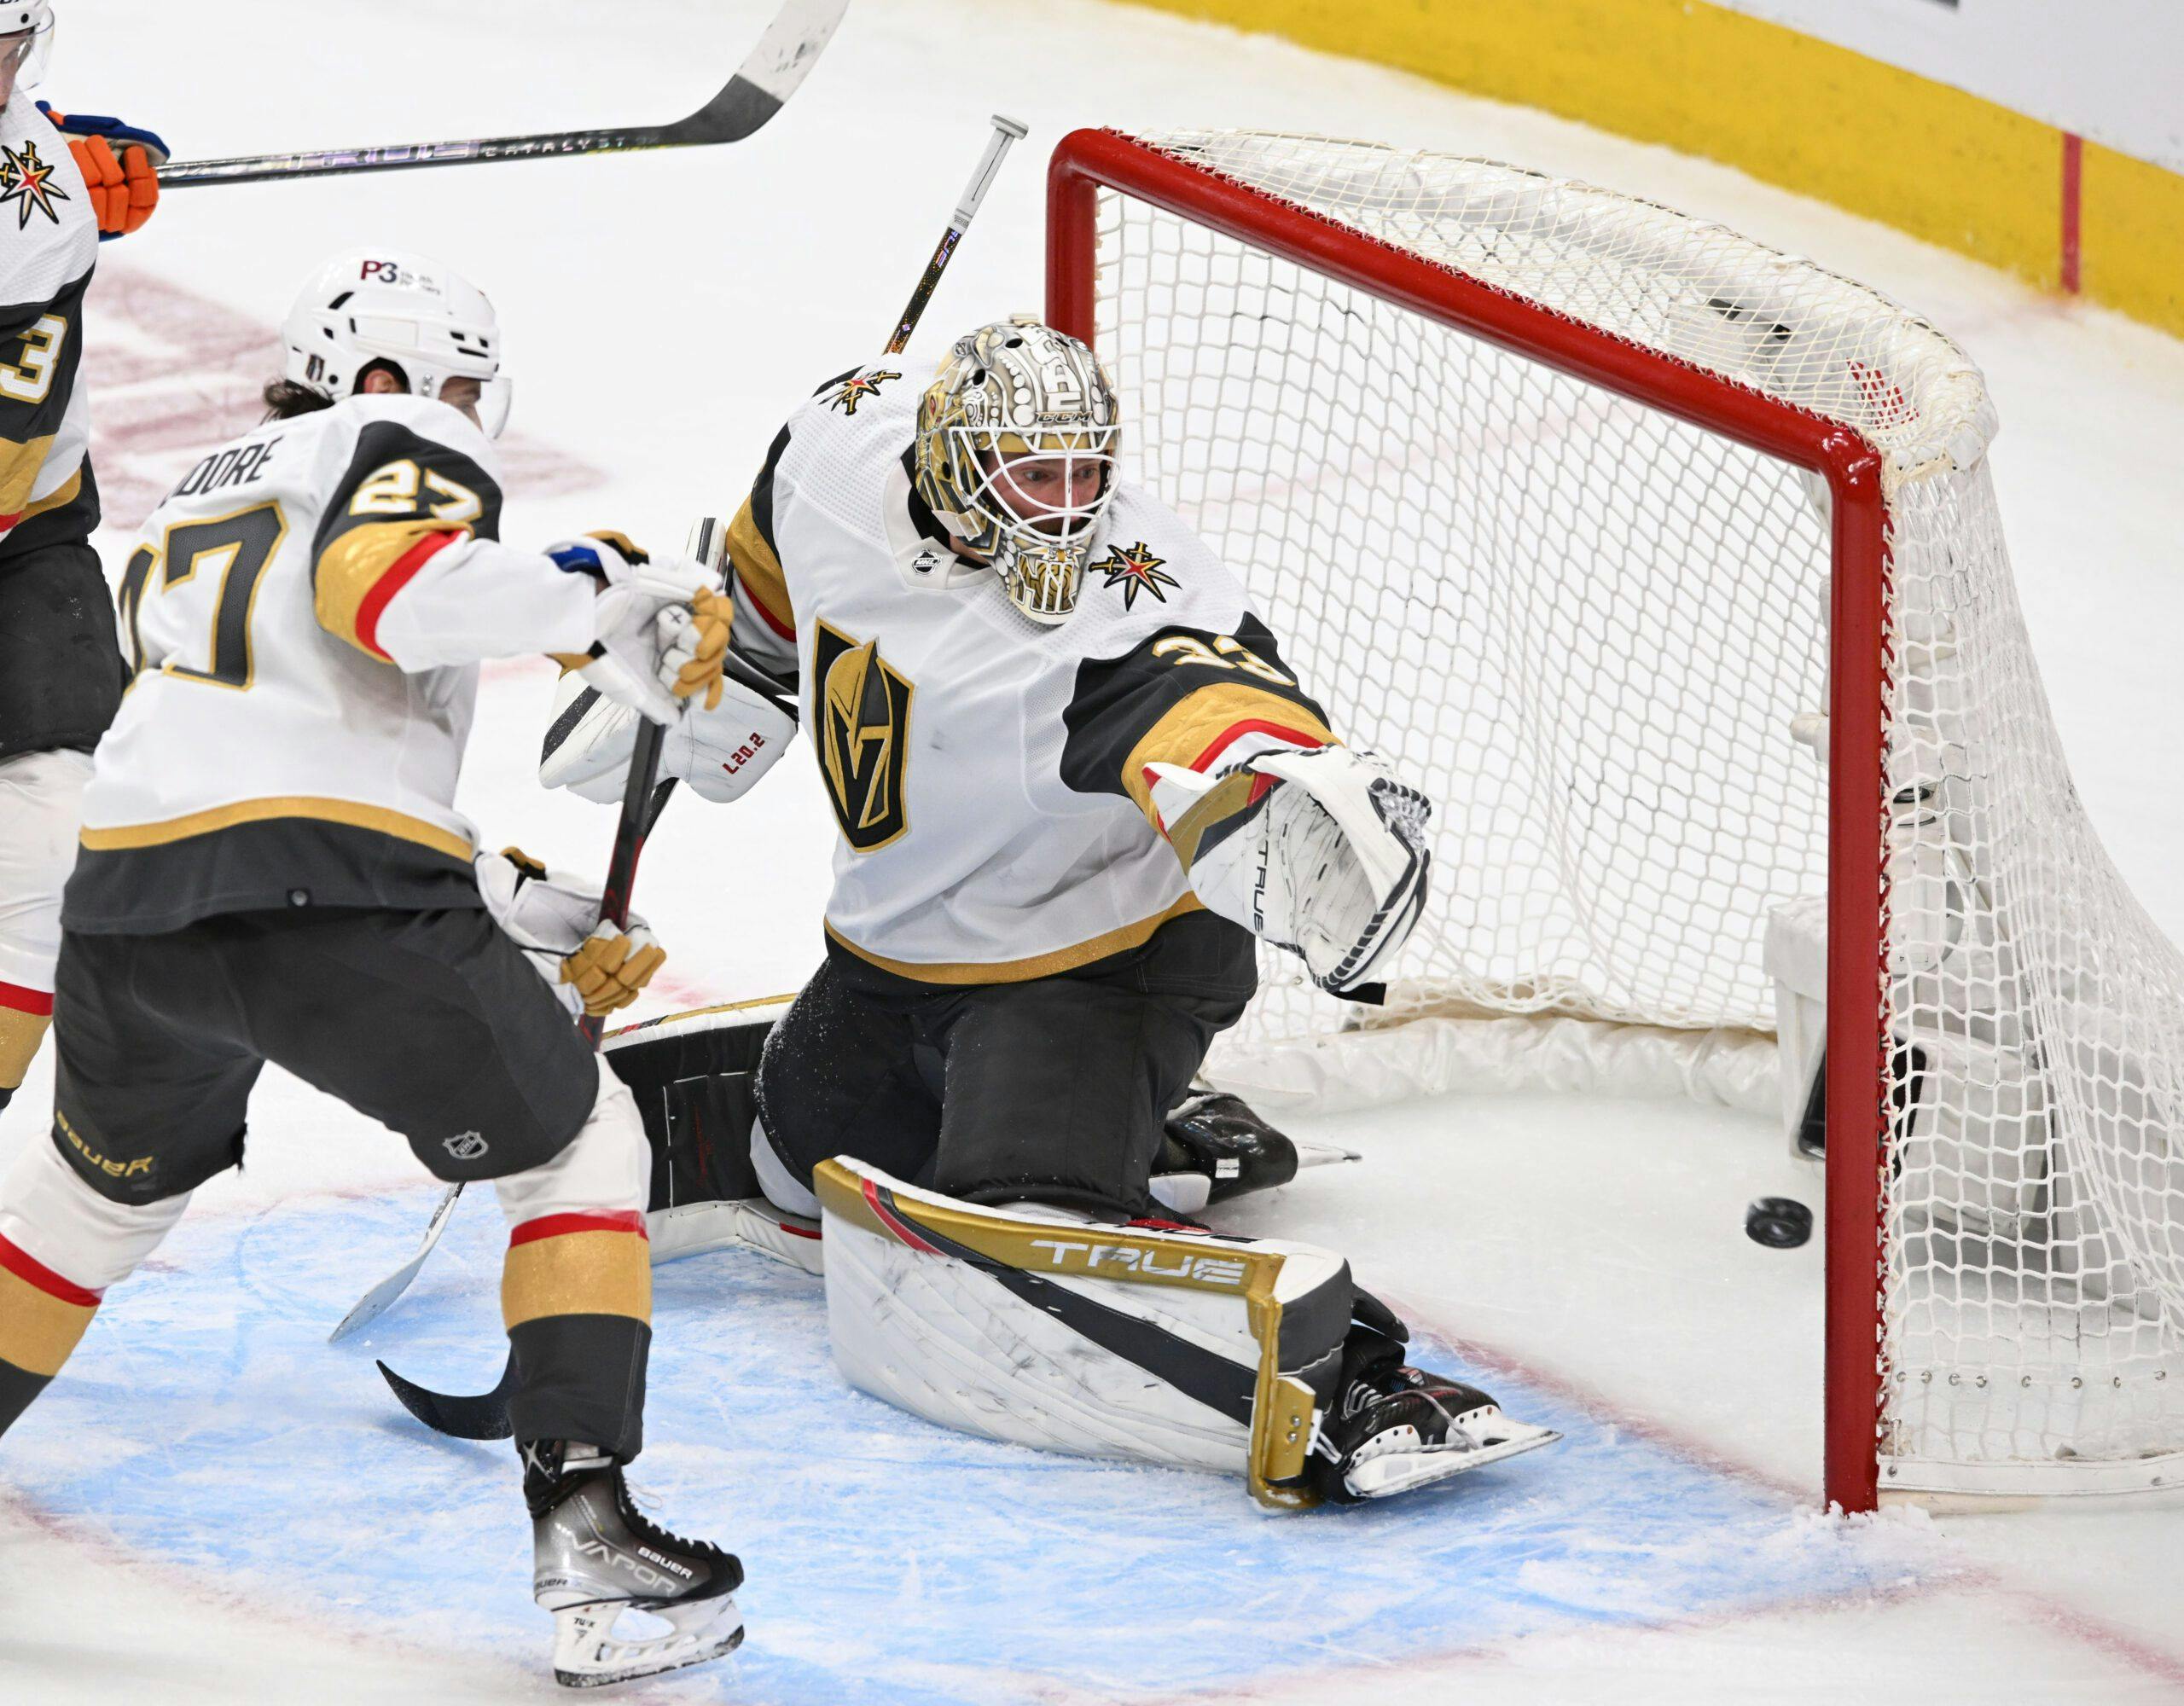 Betway starting goalie bet of the day: Bet on the desperate Florida Panthers to run up the shot clock against Adin Hill and the Vegas Golden Knights